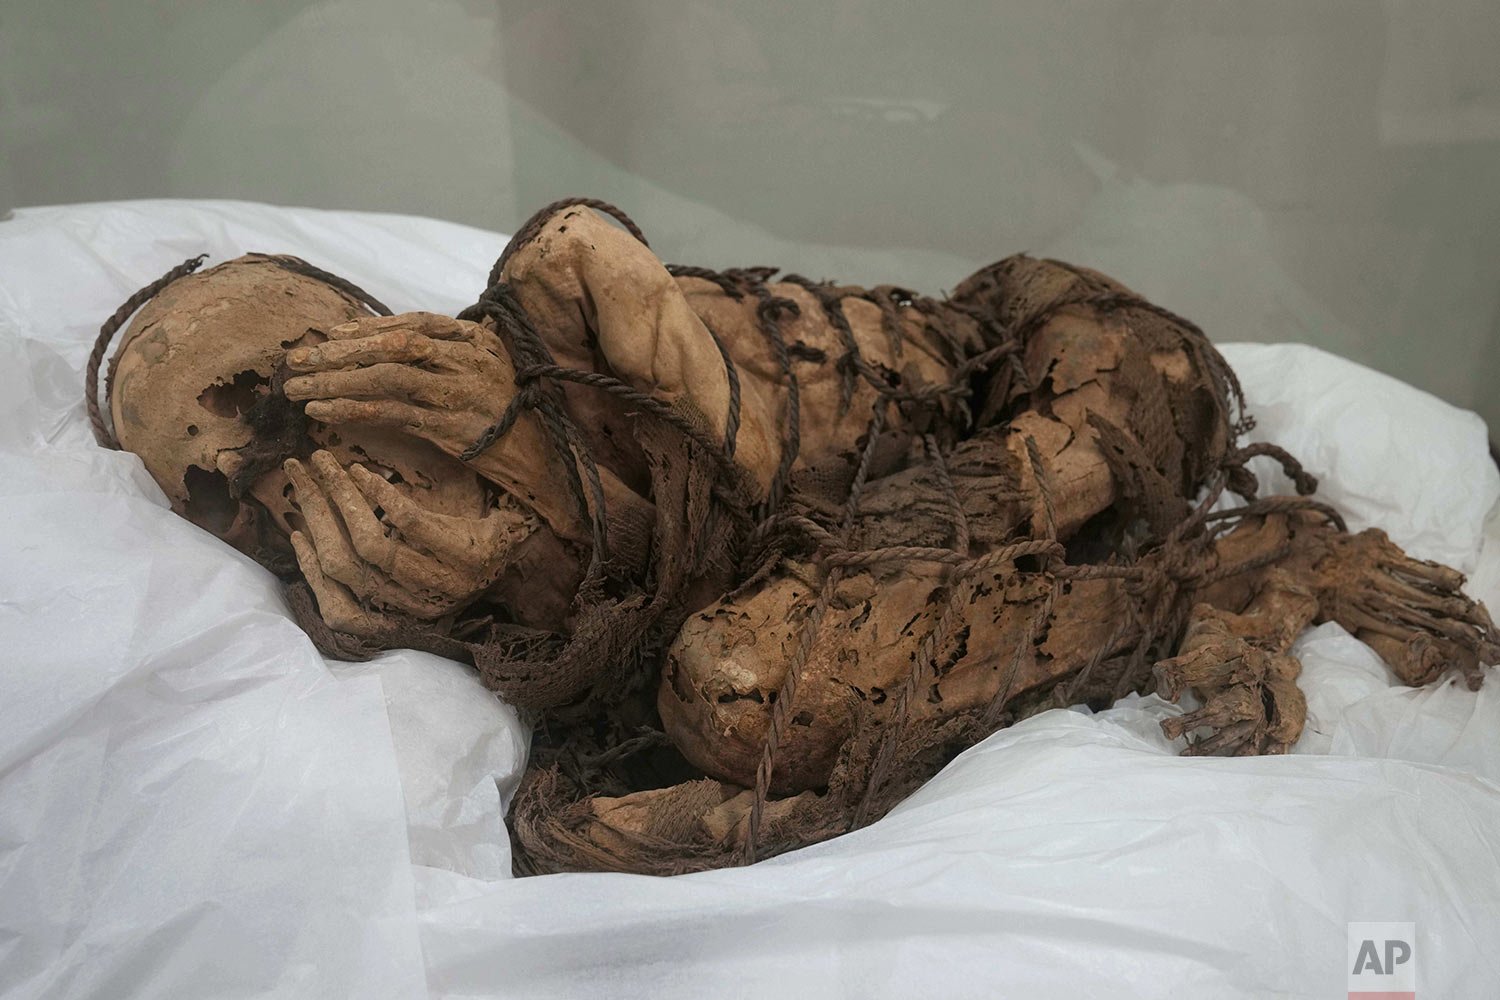  A mummy from 800-1200 AD is displayed at San Marcos University in Lima, Peru, Dec. 7, 2021. According to archeologists, the mummy was buried with its hands covering its face and wrapped with rope in Cajamarquilla. (AP Photo/Martin Mejia) 